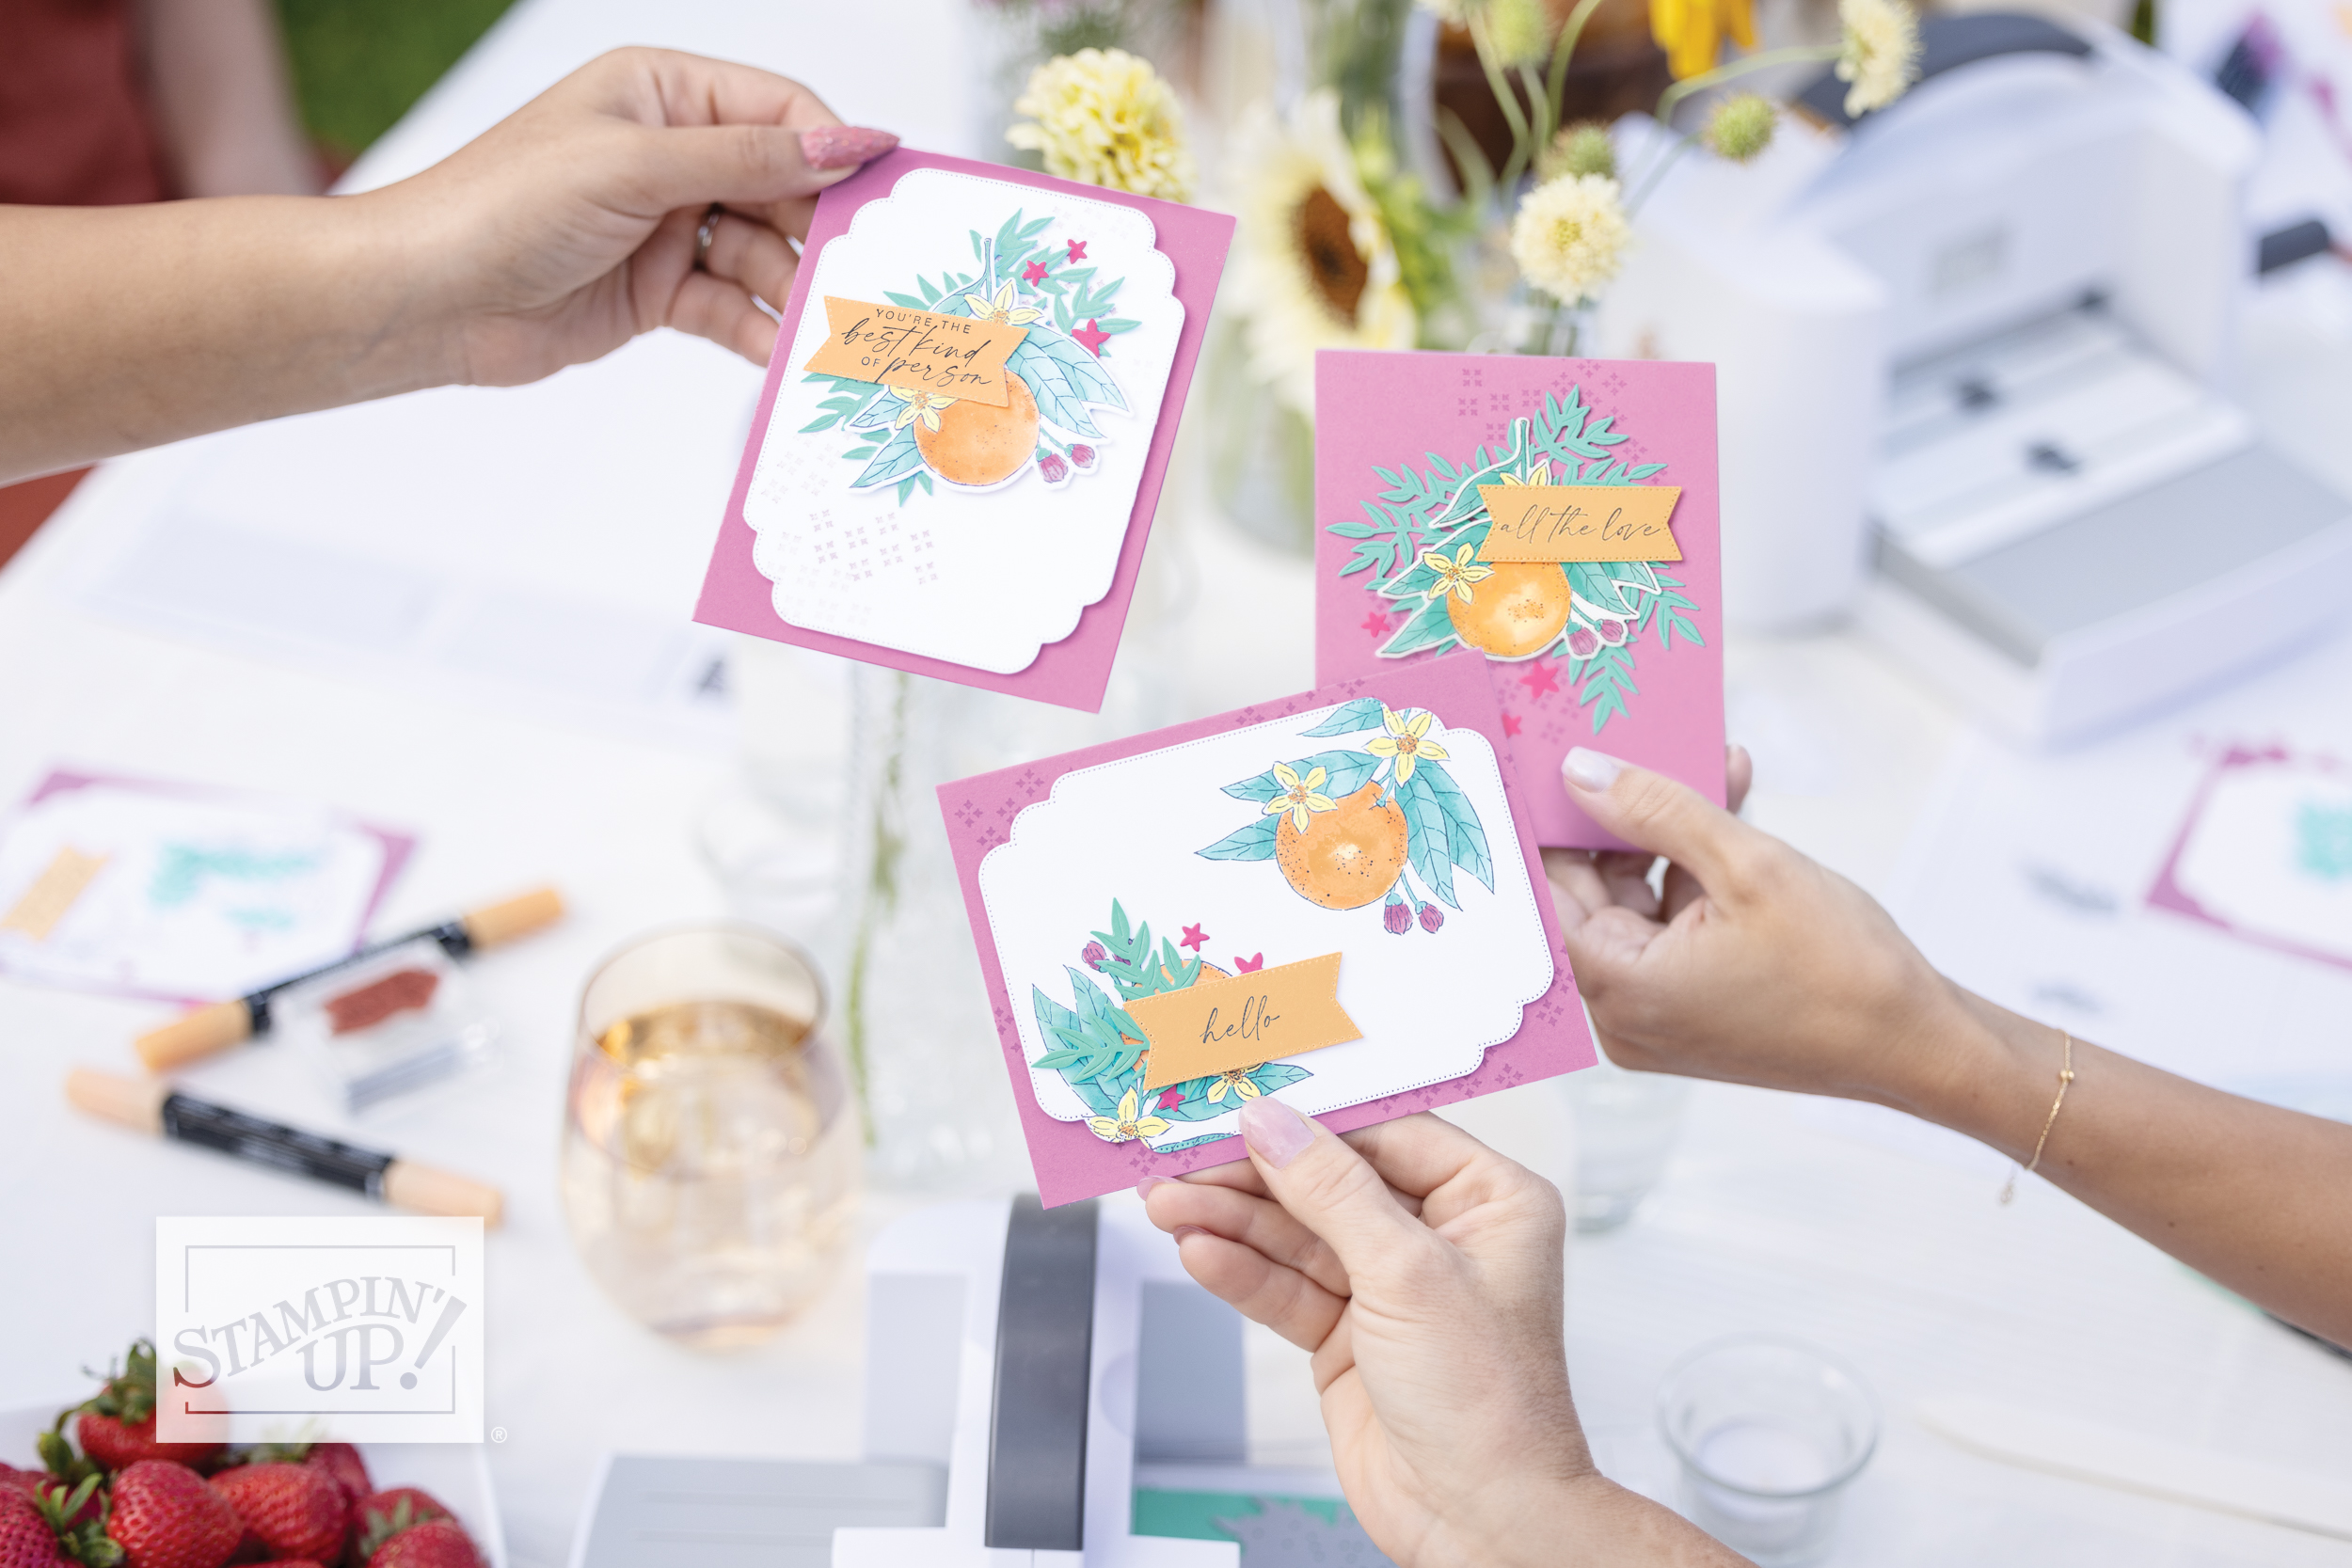 Discounts & Fun with Stampin Up